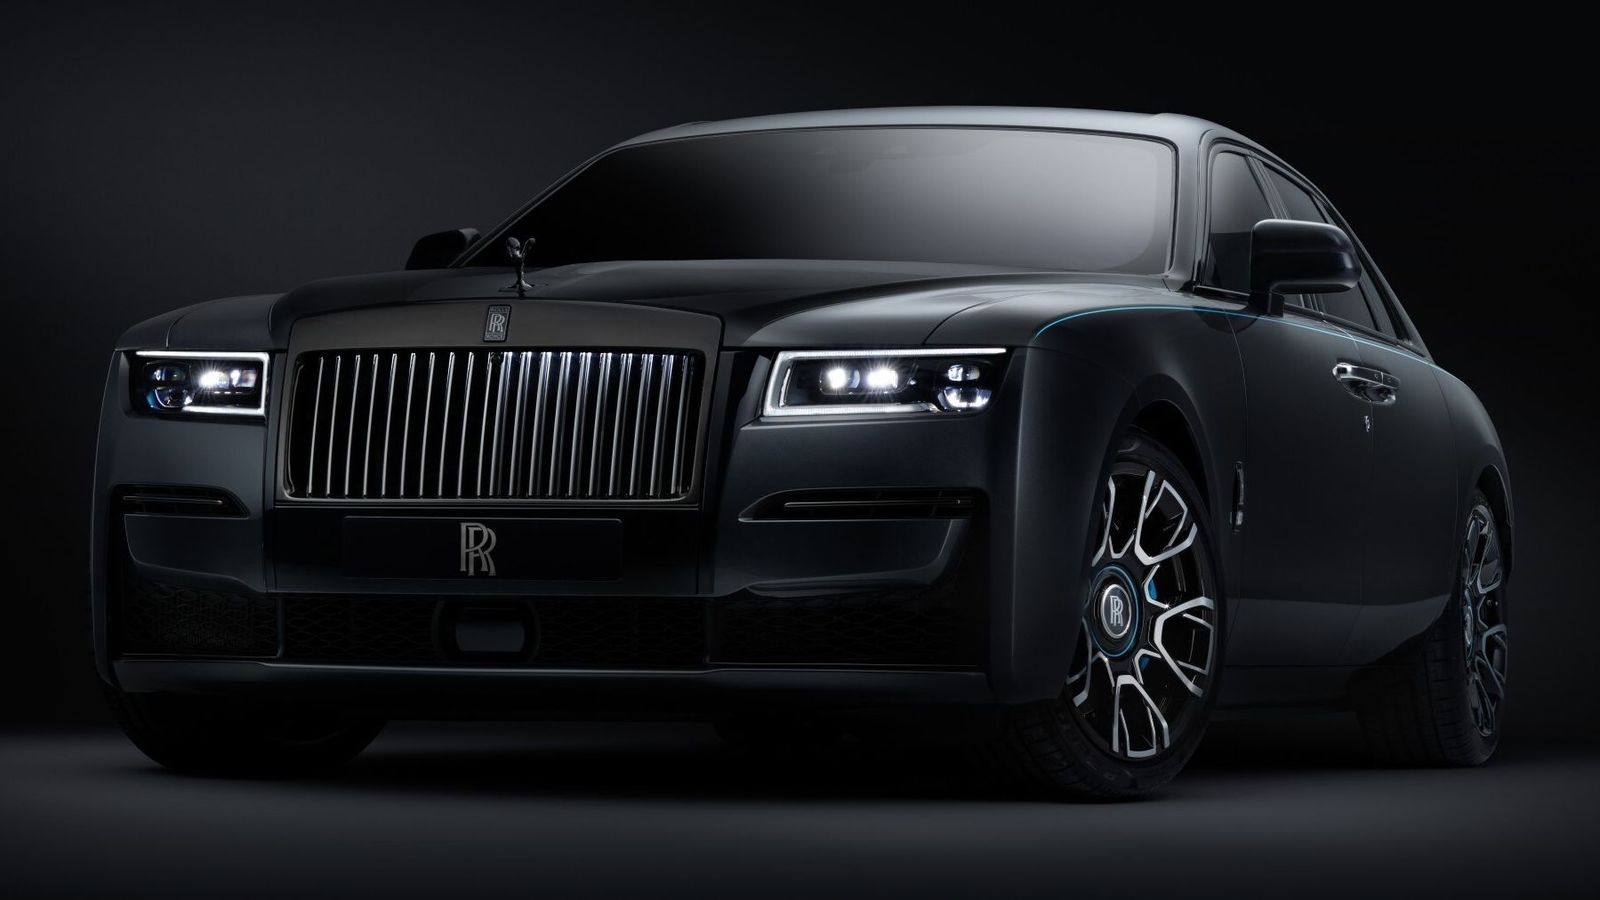 RollsRoyce Welcome to the home of the most luxurious cars in the world